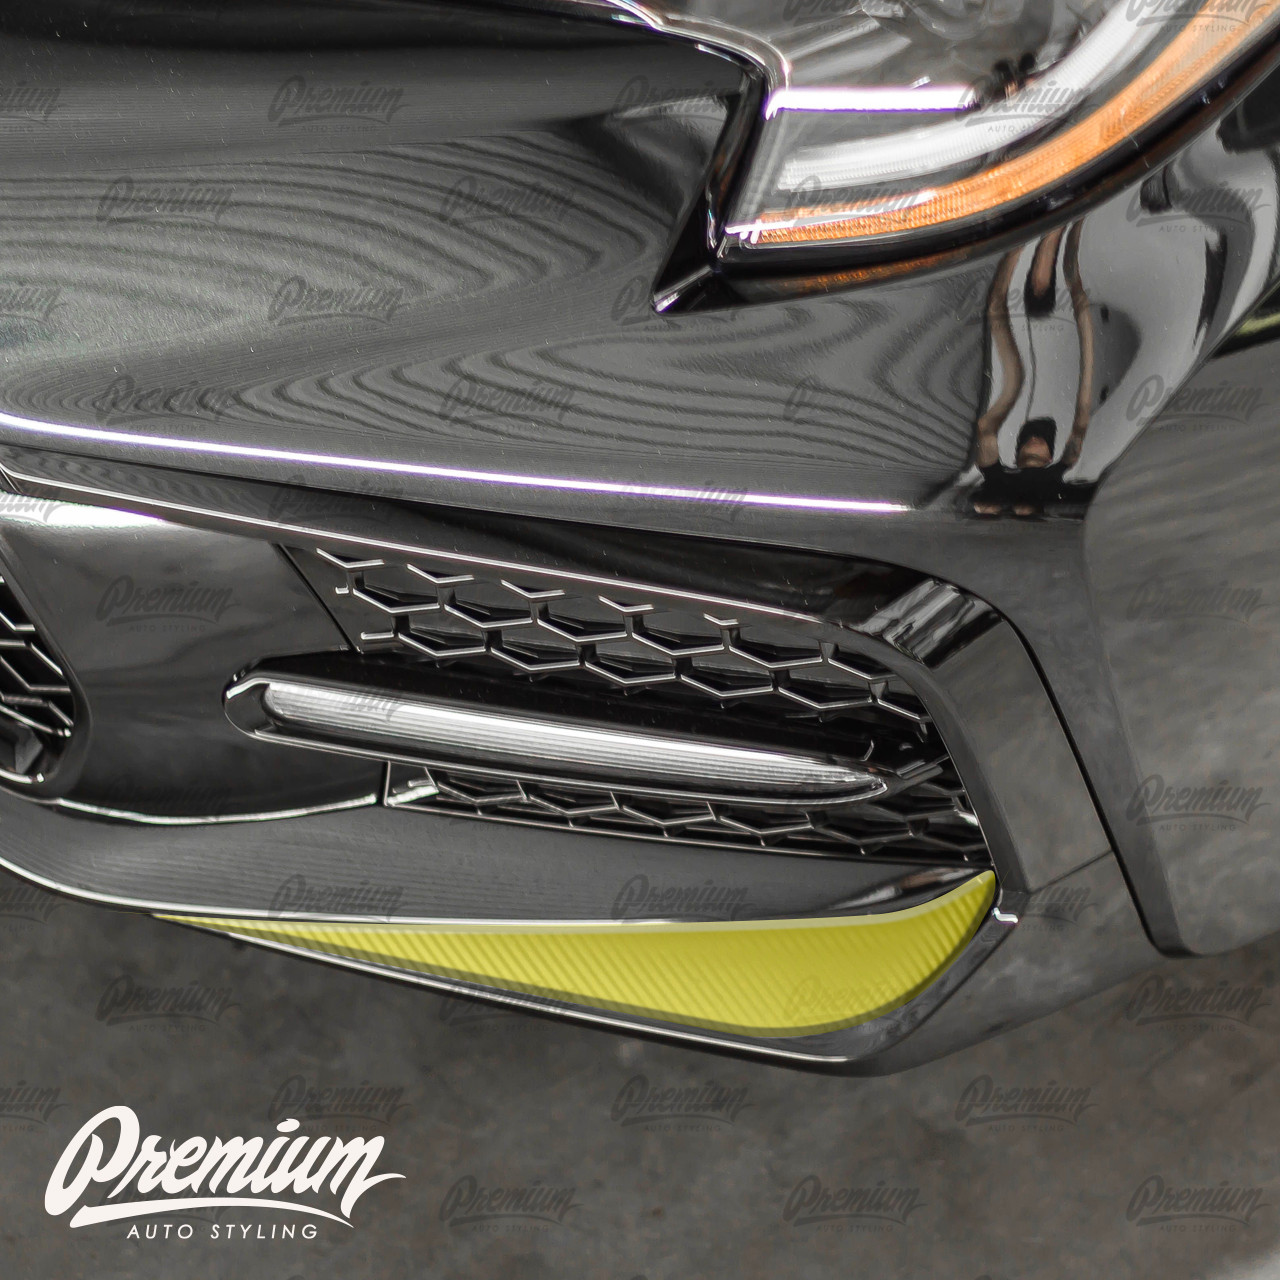 How To Get Overlaid: Our Carbon Fiber Overlaying DIY - Car Repair